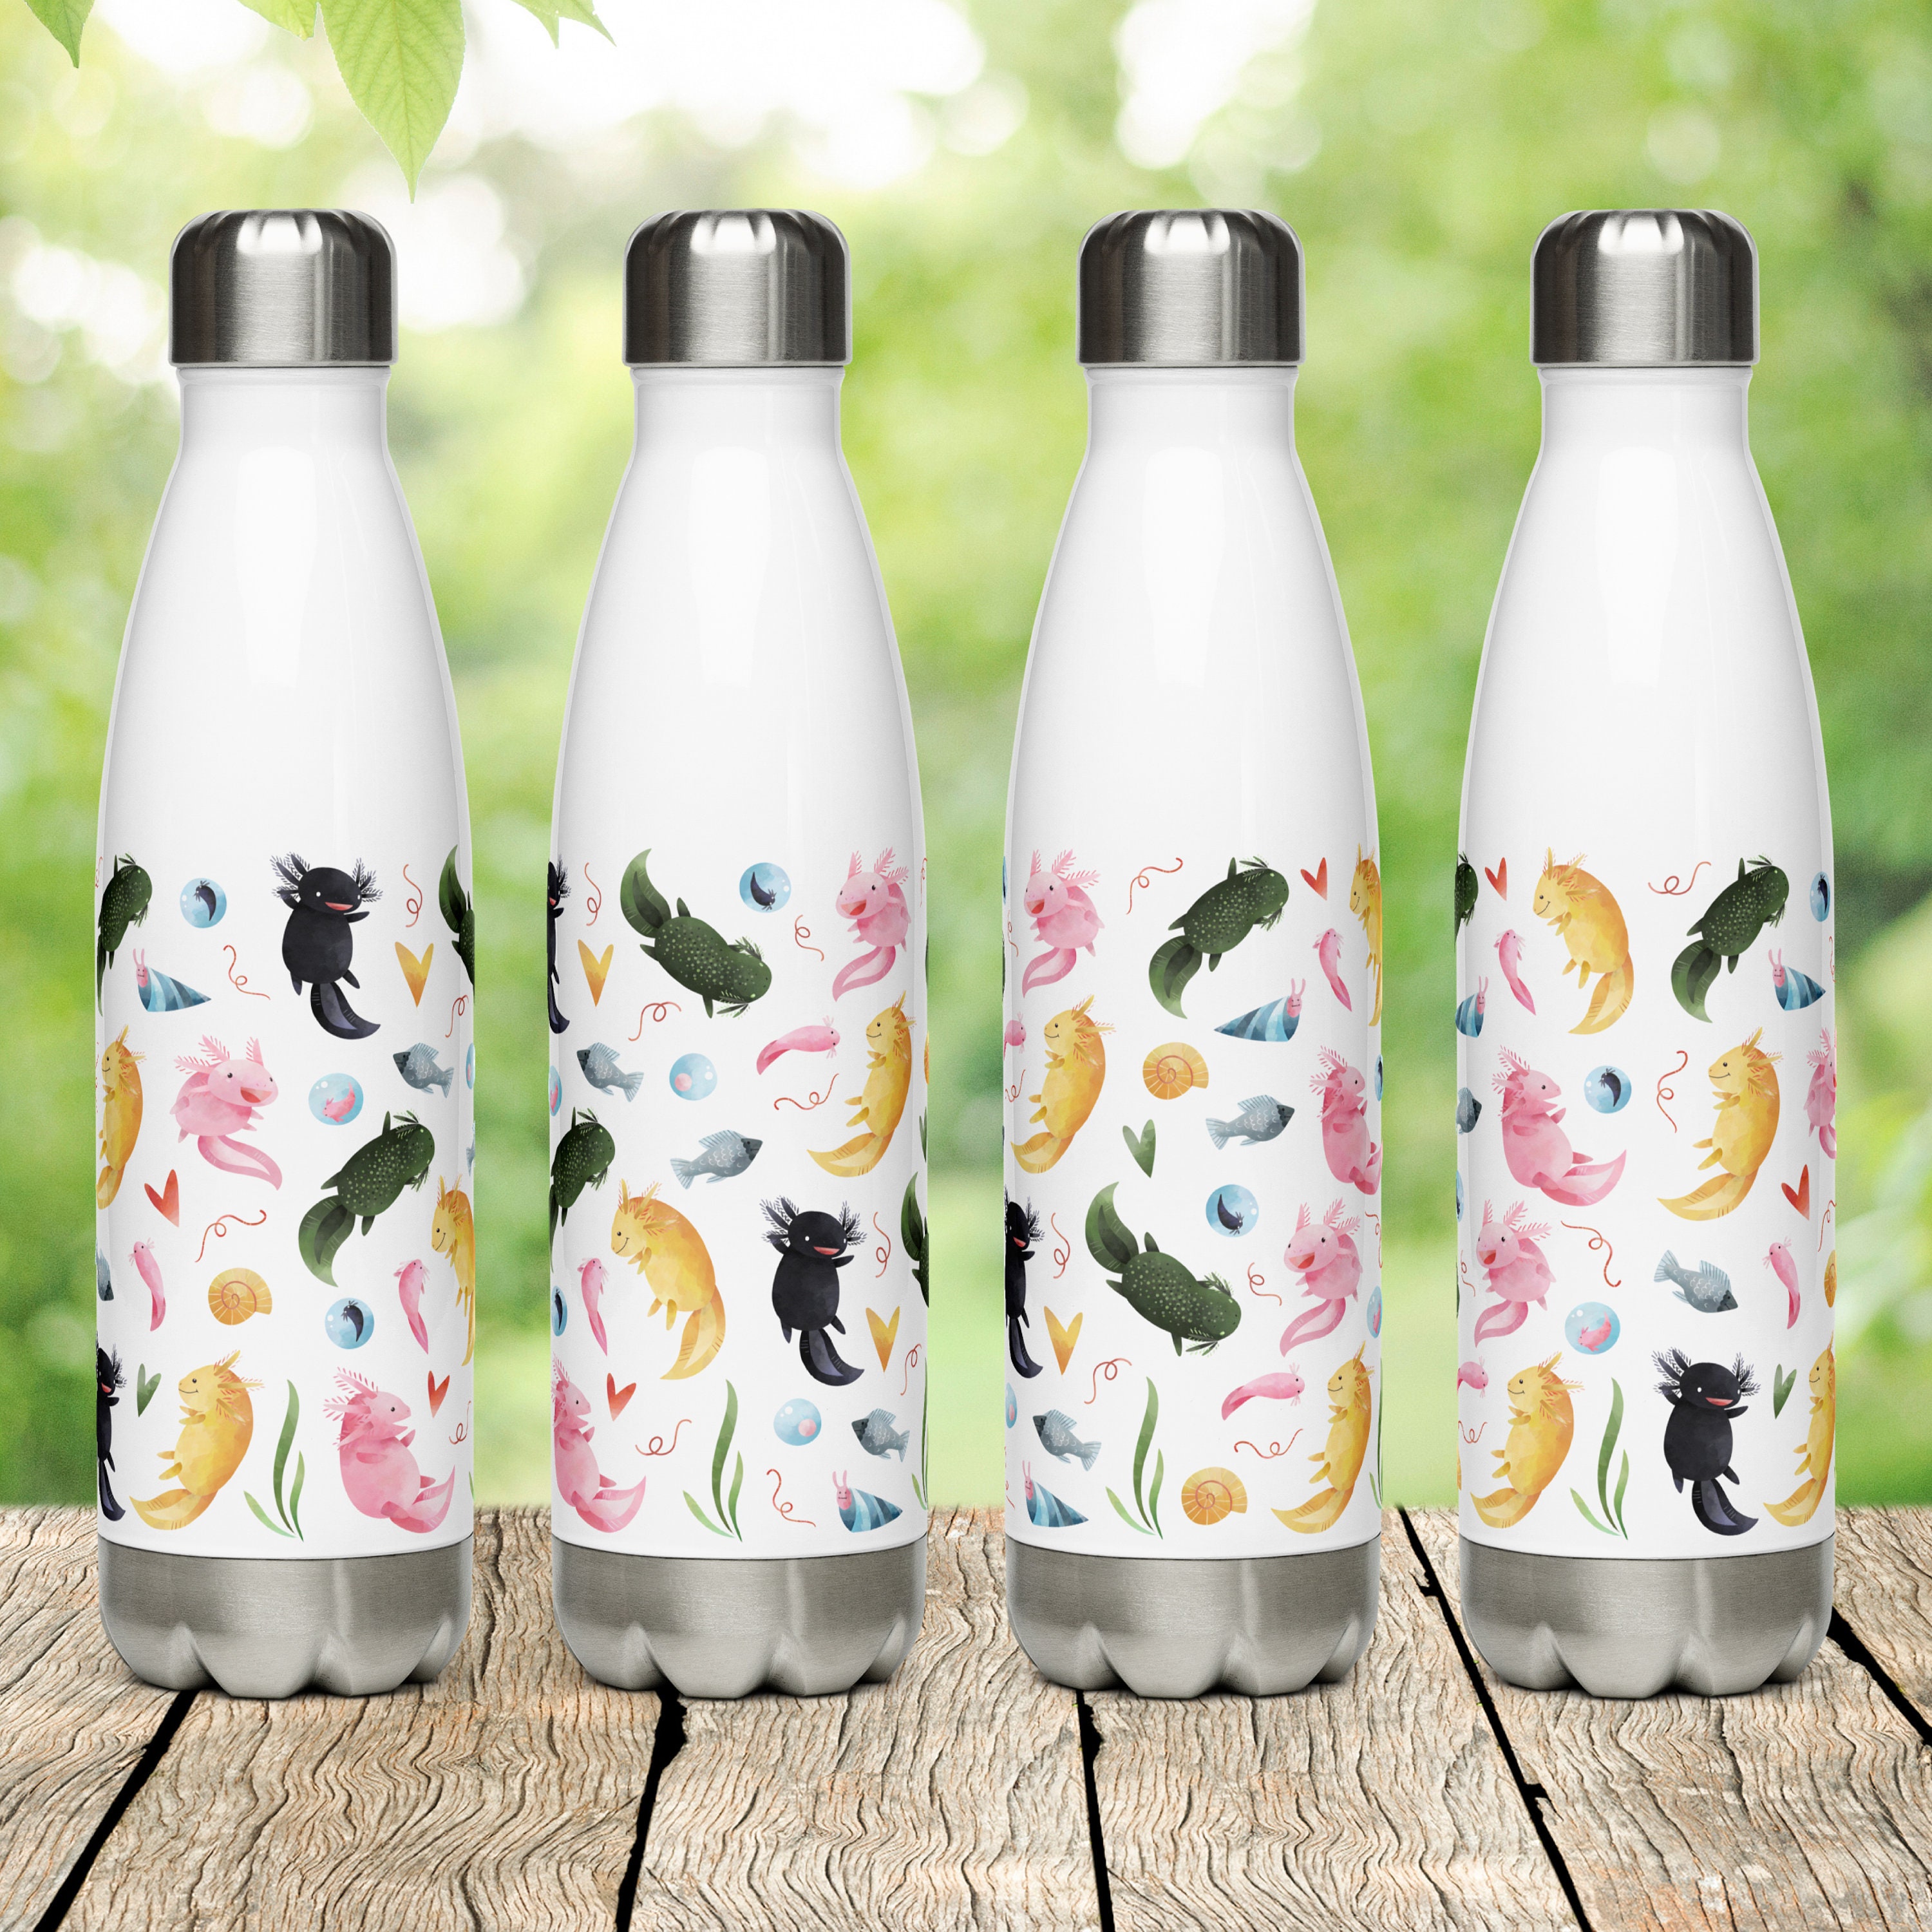 Pack of 2 Cute Thermos Water Bottle - 5 Oz Mini Insulated Stainless Steel  Bottle - Keeps Cold for 12 hours, Hot for 6 hours, Perfect for Purse or  Kids